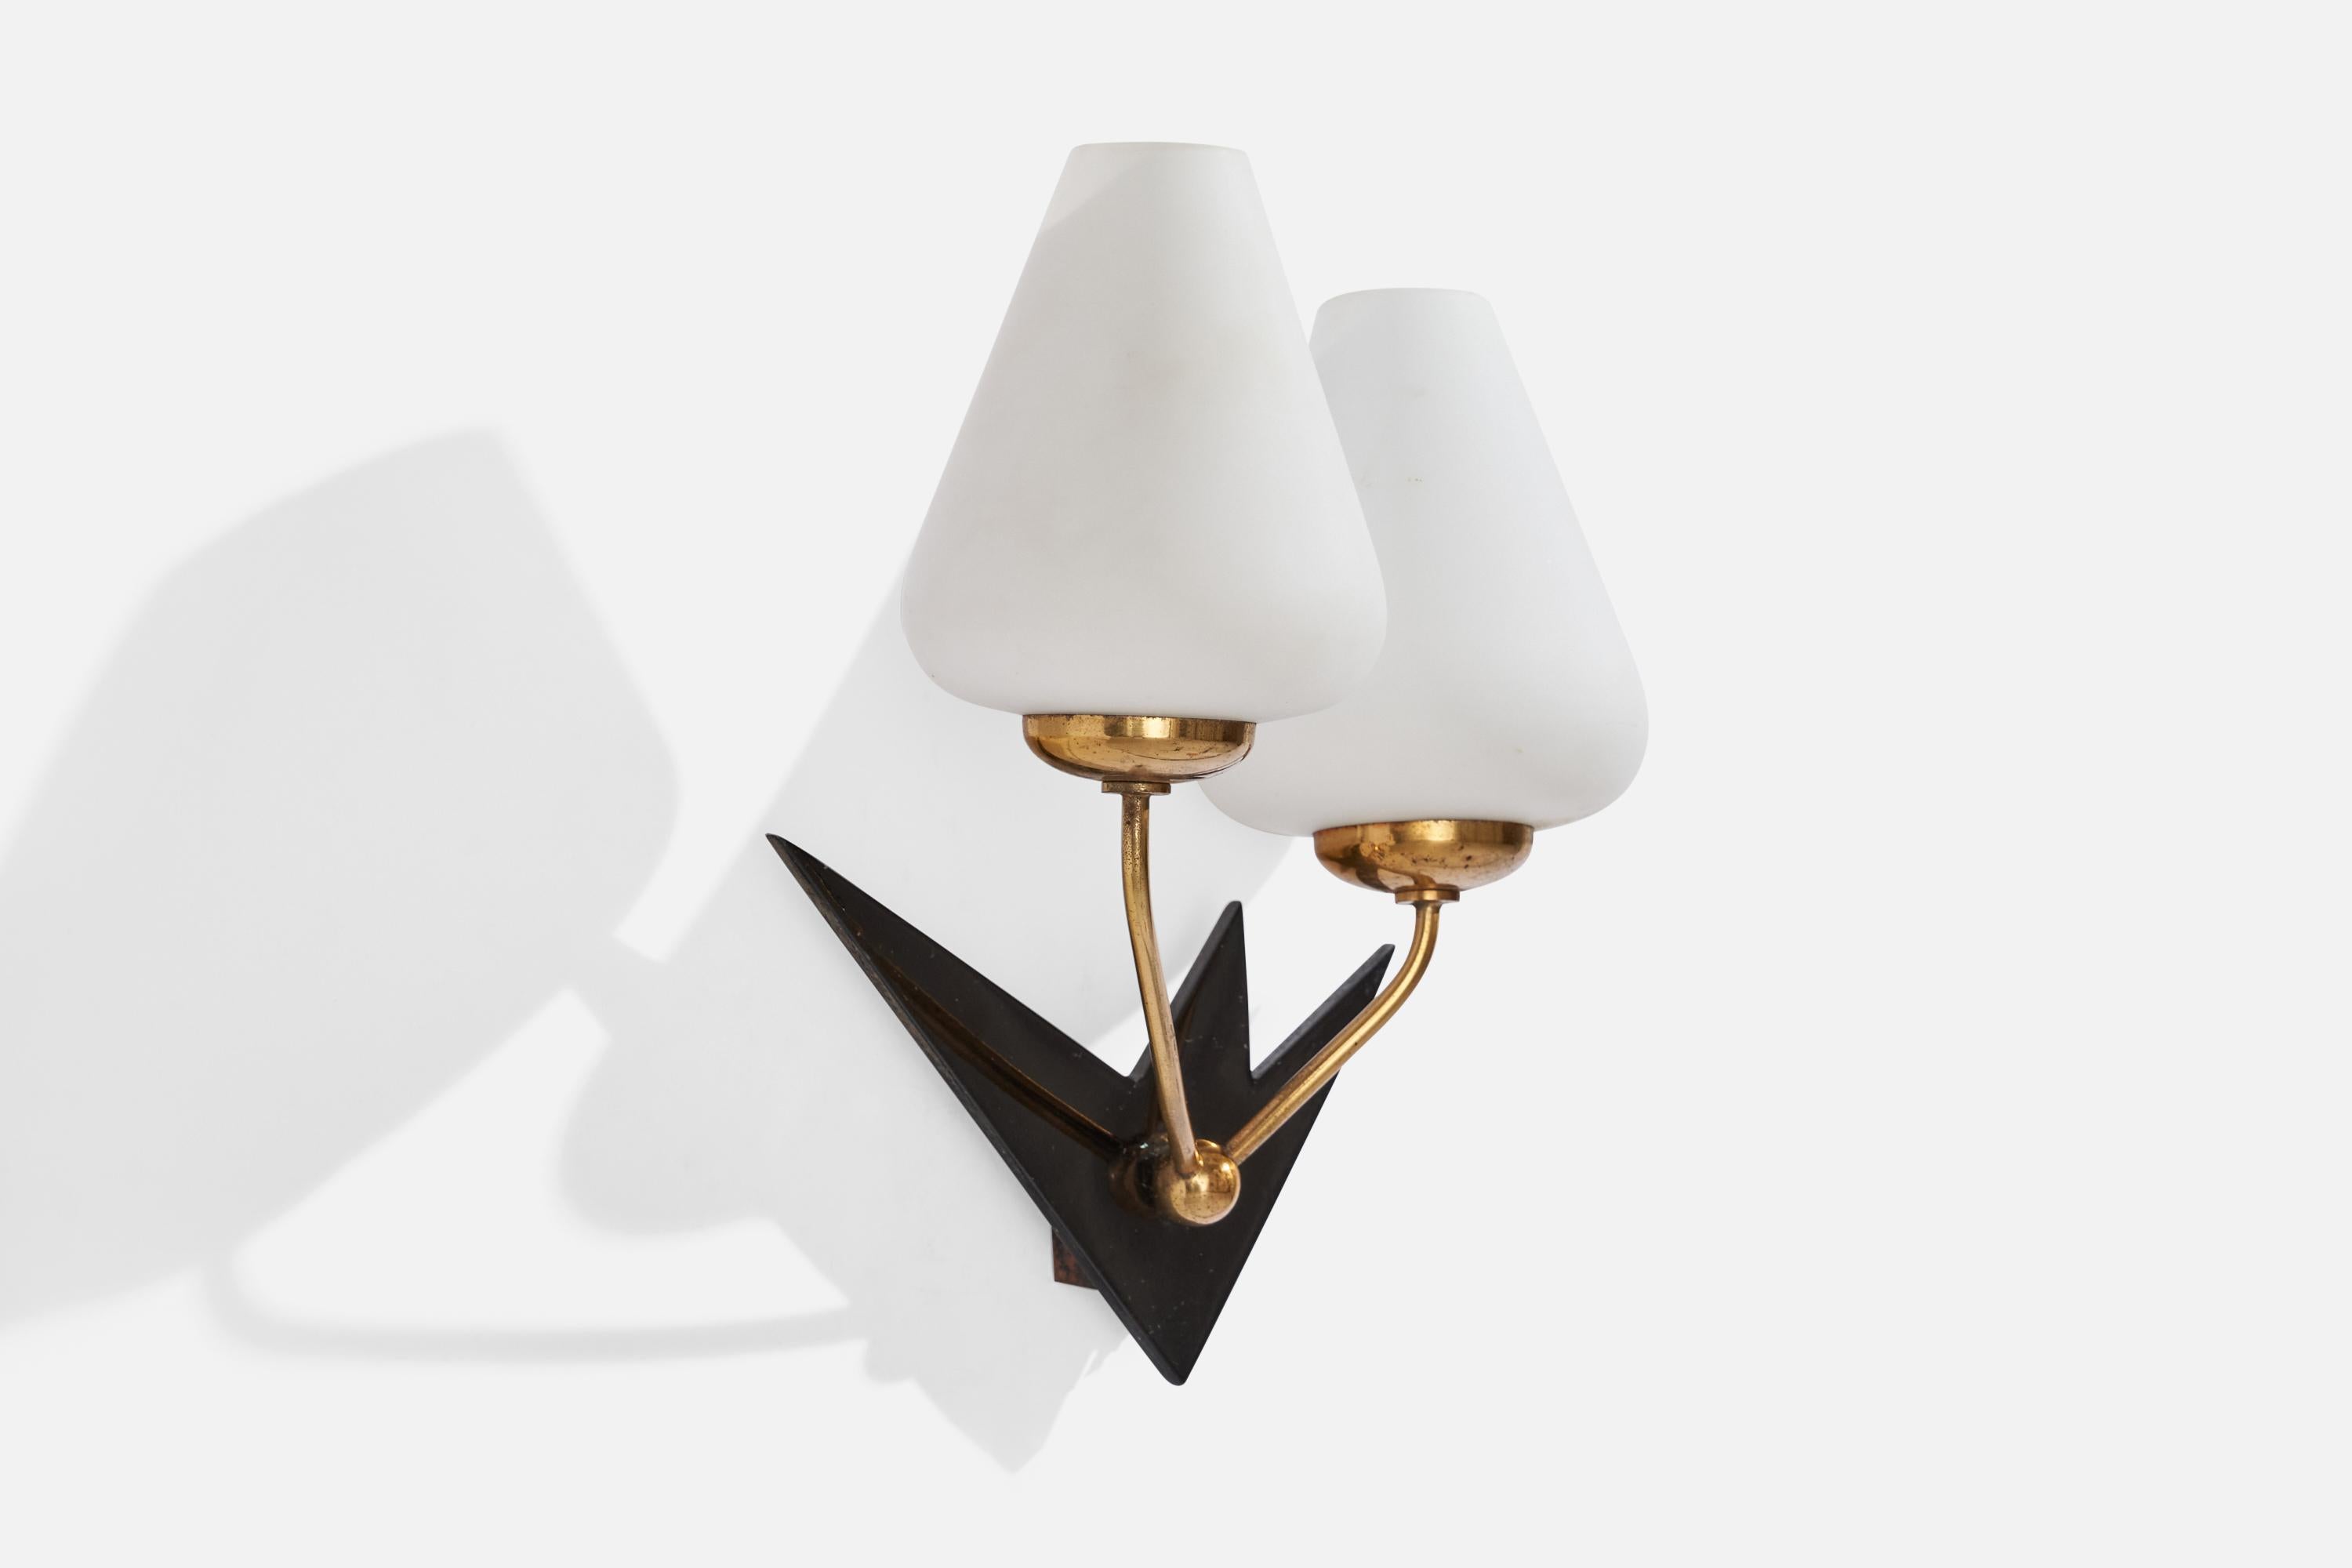 A brass, black-lacquered metal and opaline glass wall light produced by Arlus, France, c. 1950s.

Overall Dimensions (inches): 12” H x 10” W x 2.60” D
Back Plate Dimensions (inches): 1.45” H x 1.47” W x 1” D
Bulb Specifications: E-14 Bulb
Number of